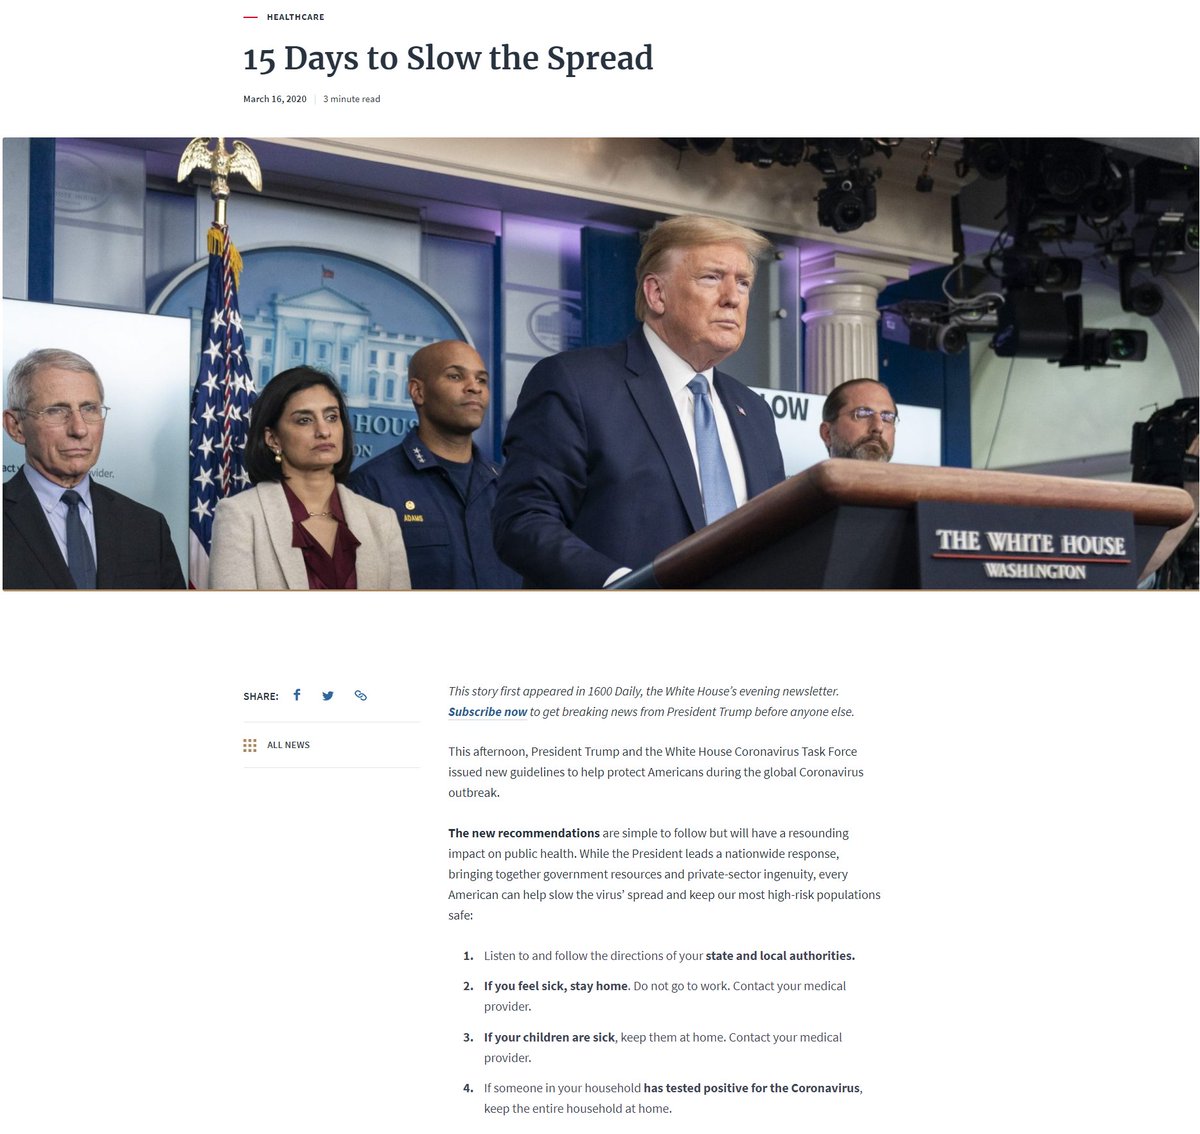 2) Trump then waited until March 16 to announce his support for these measures....  https://www.whitehouse.gov/articles/15-days-slow-spread/